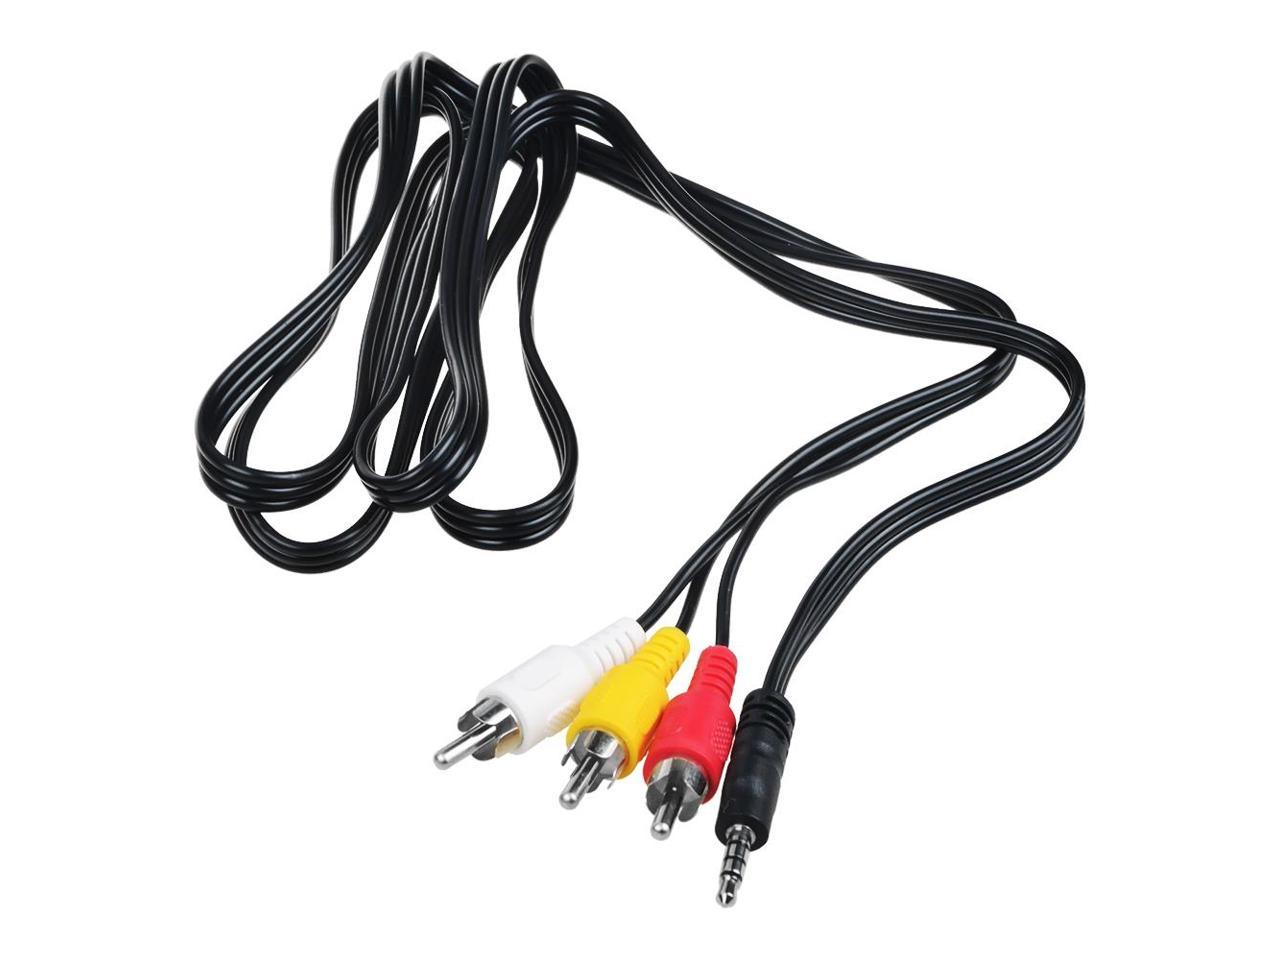 dCables Sony Handycam CCD-TRV118 AV Cable TV Video Cord for Sony Handycam CCD-TRV118